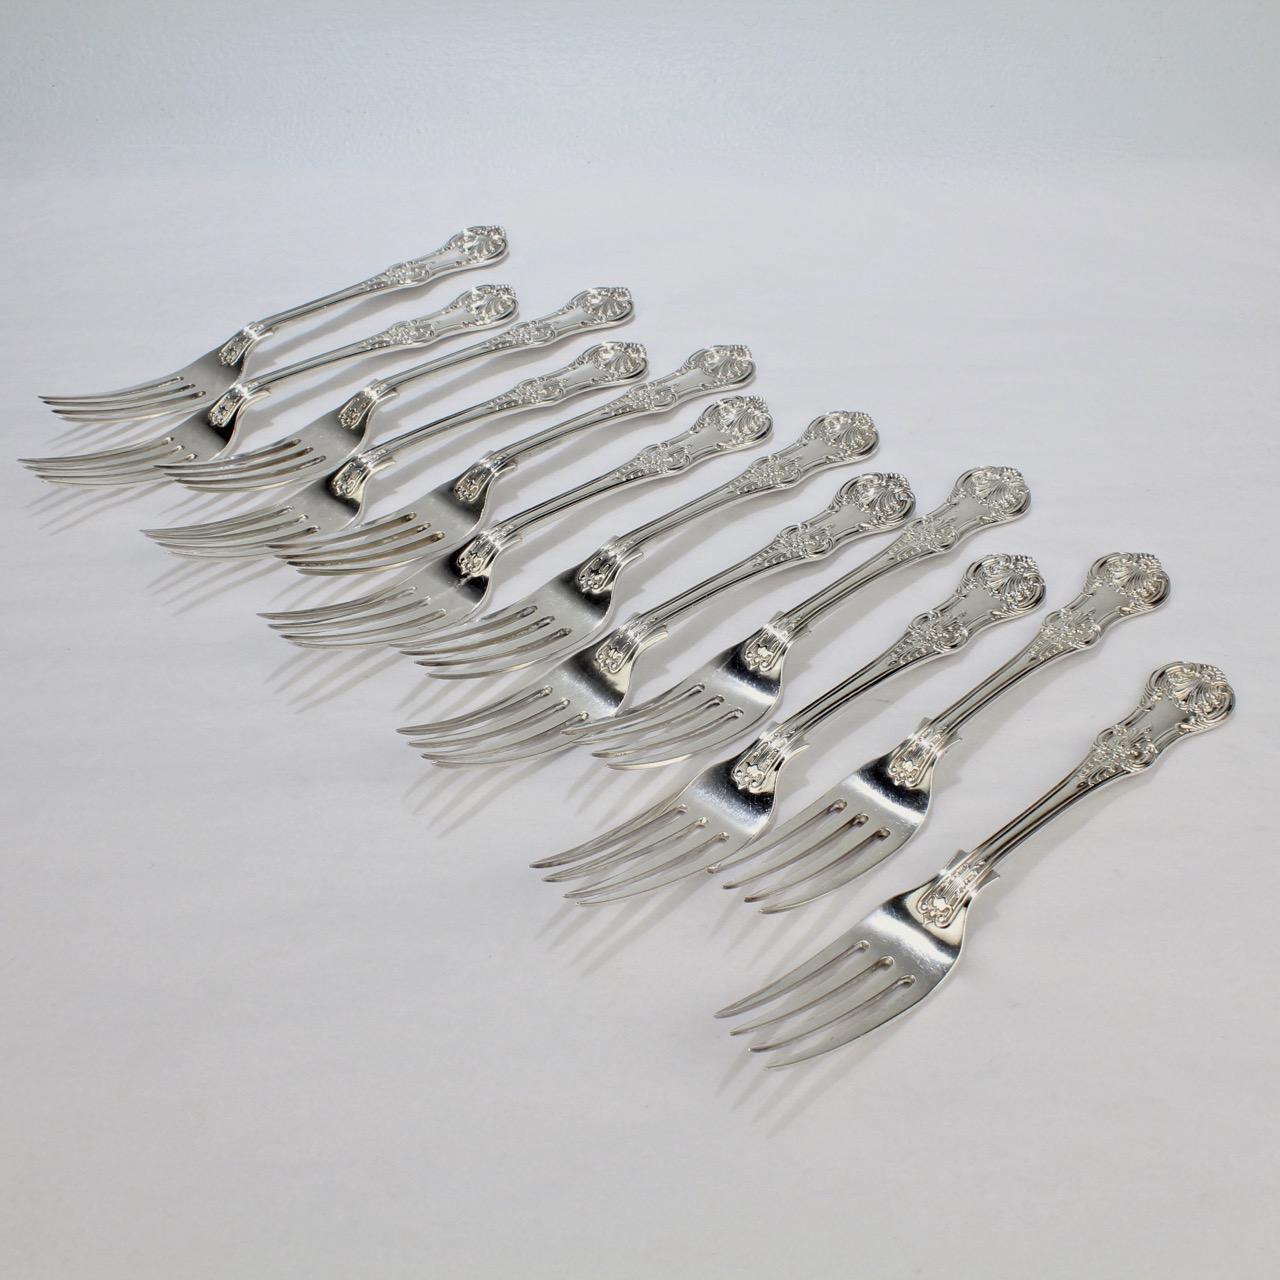 19th Century English Queen Pattern Sterling Silver 112 Piece Flatware Set for 12 For Sale 4